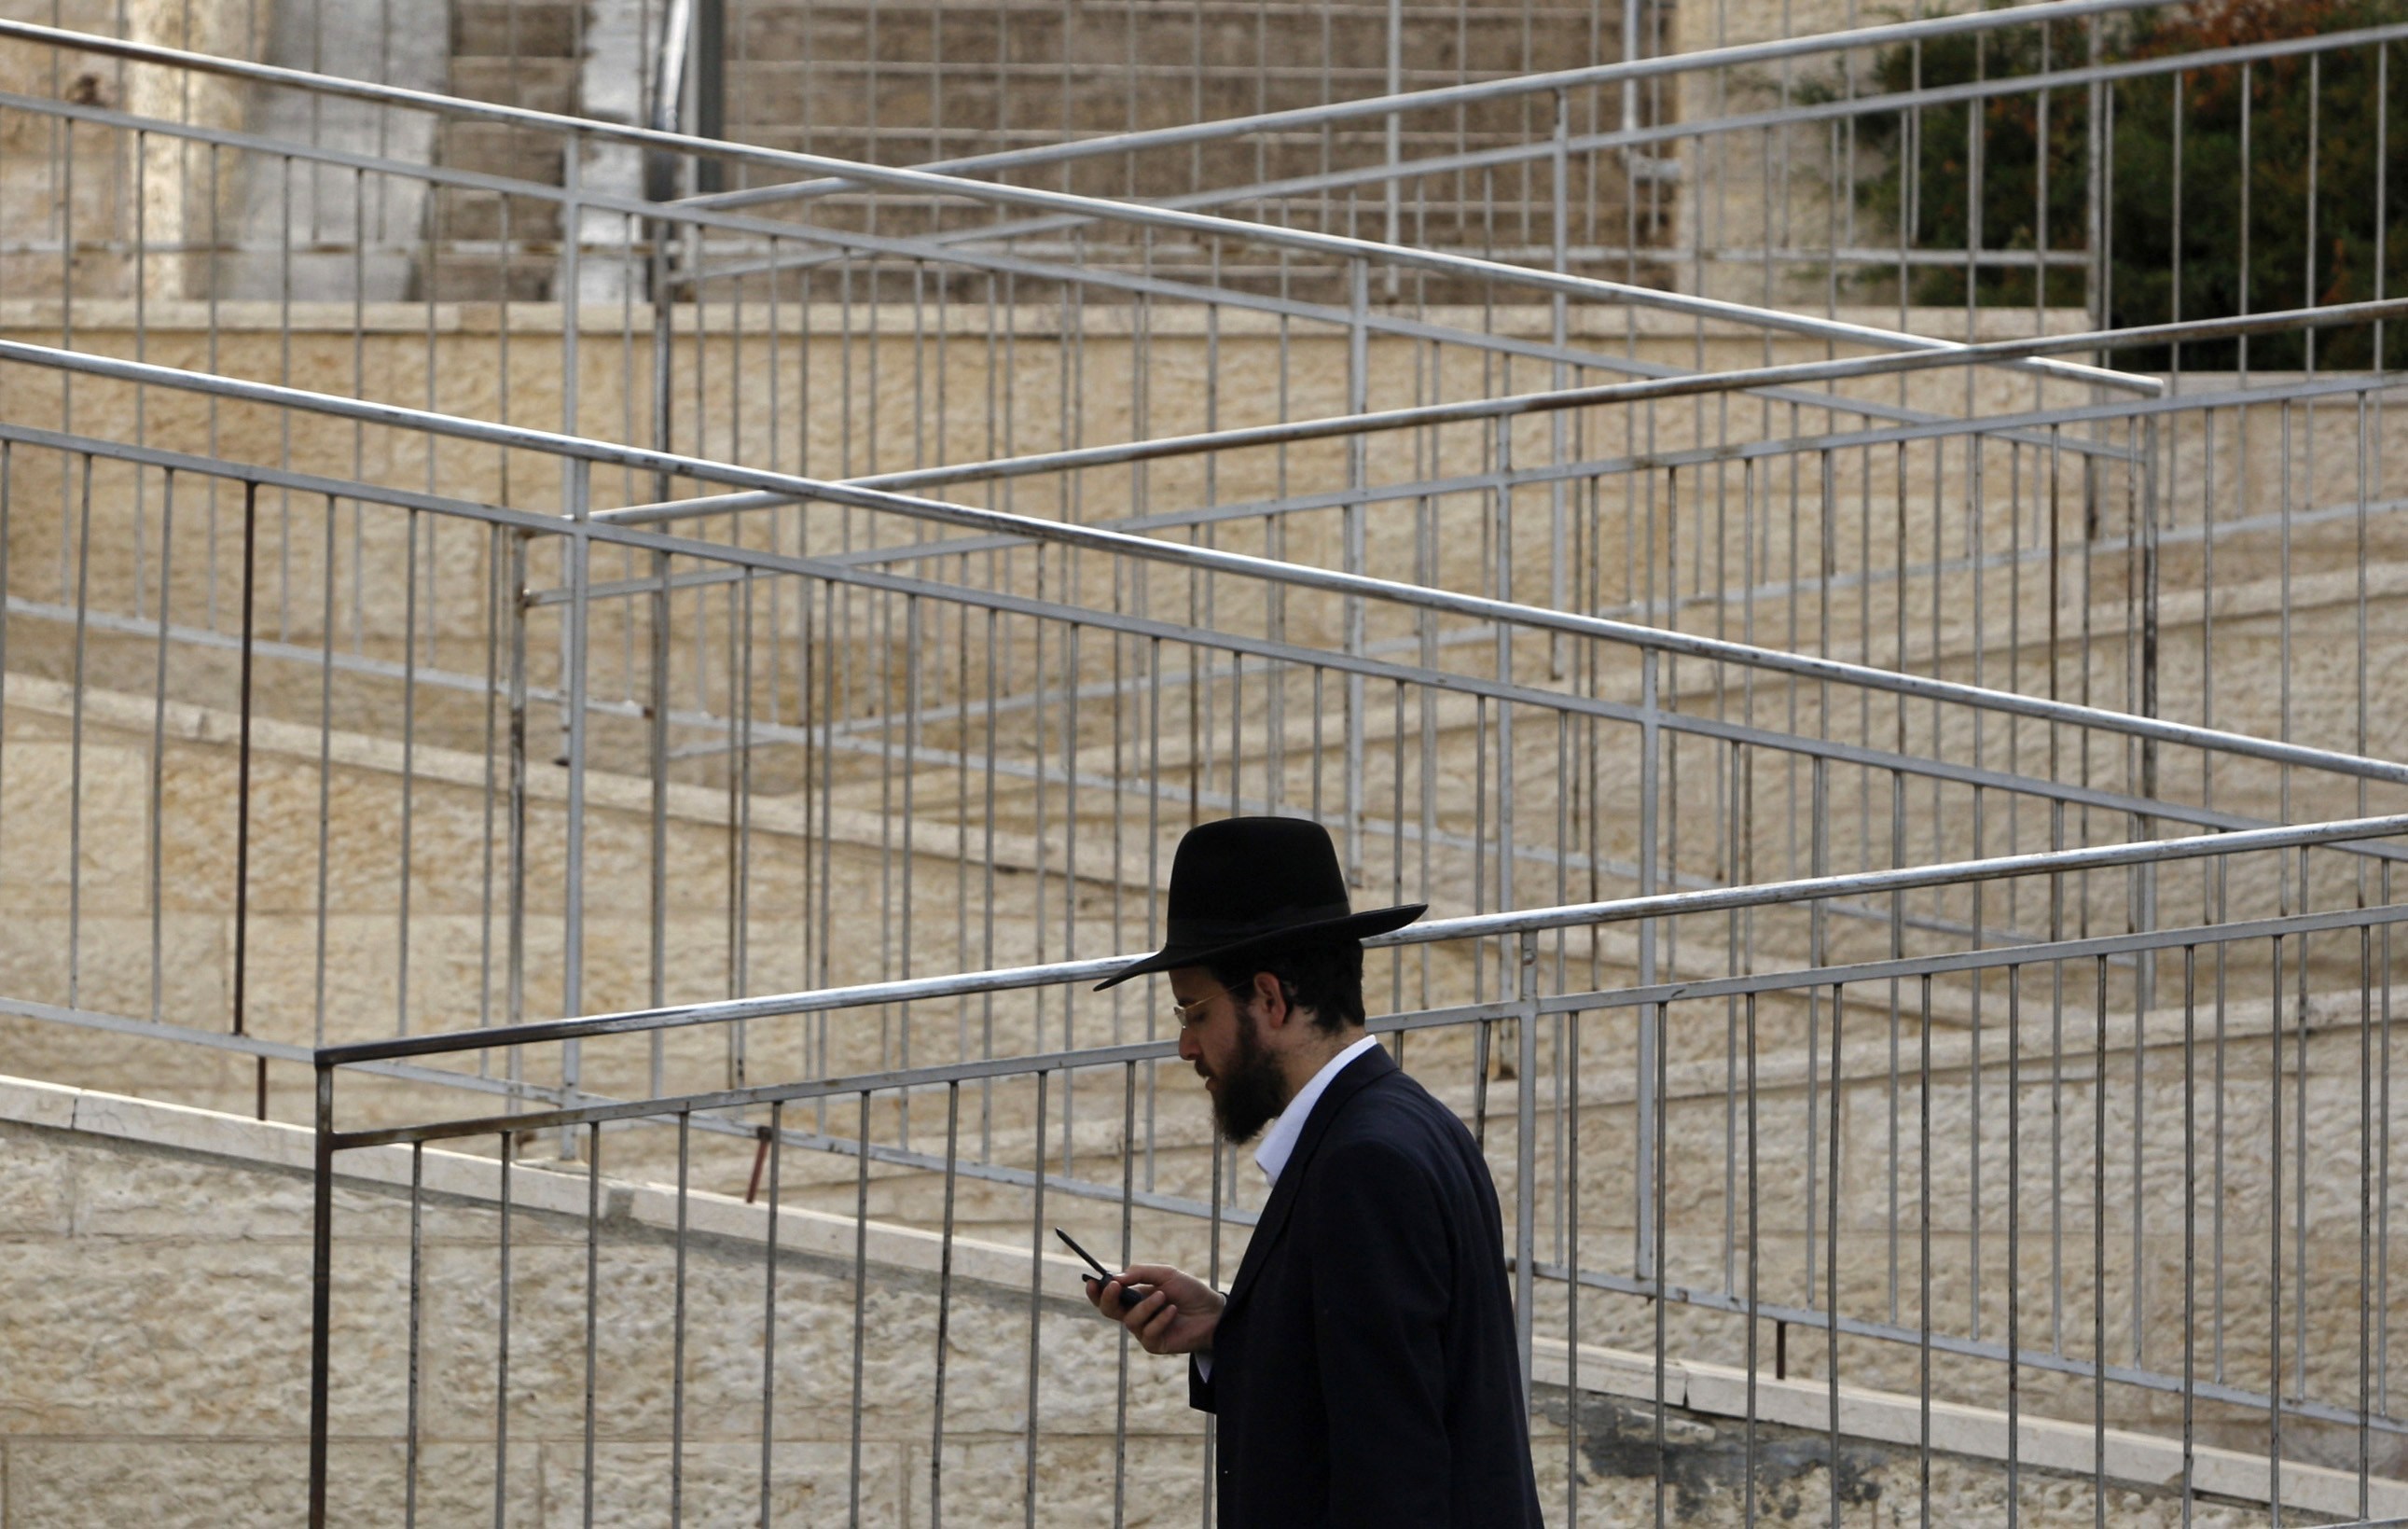 An ultra-Orthodox Jew holds walks through Ramat Shlomo, a  settlement in the occupied West Bank. Photo: Reuters